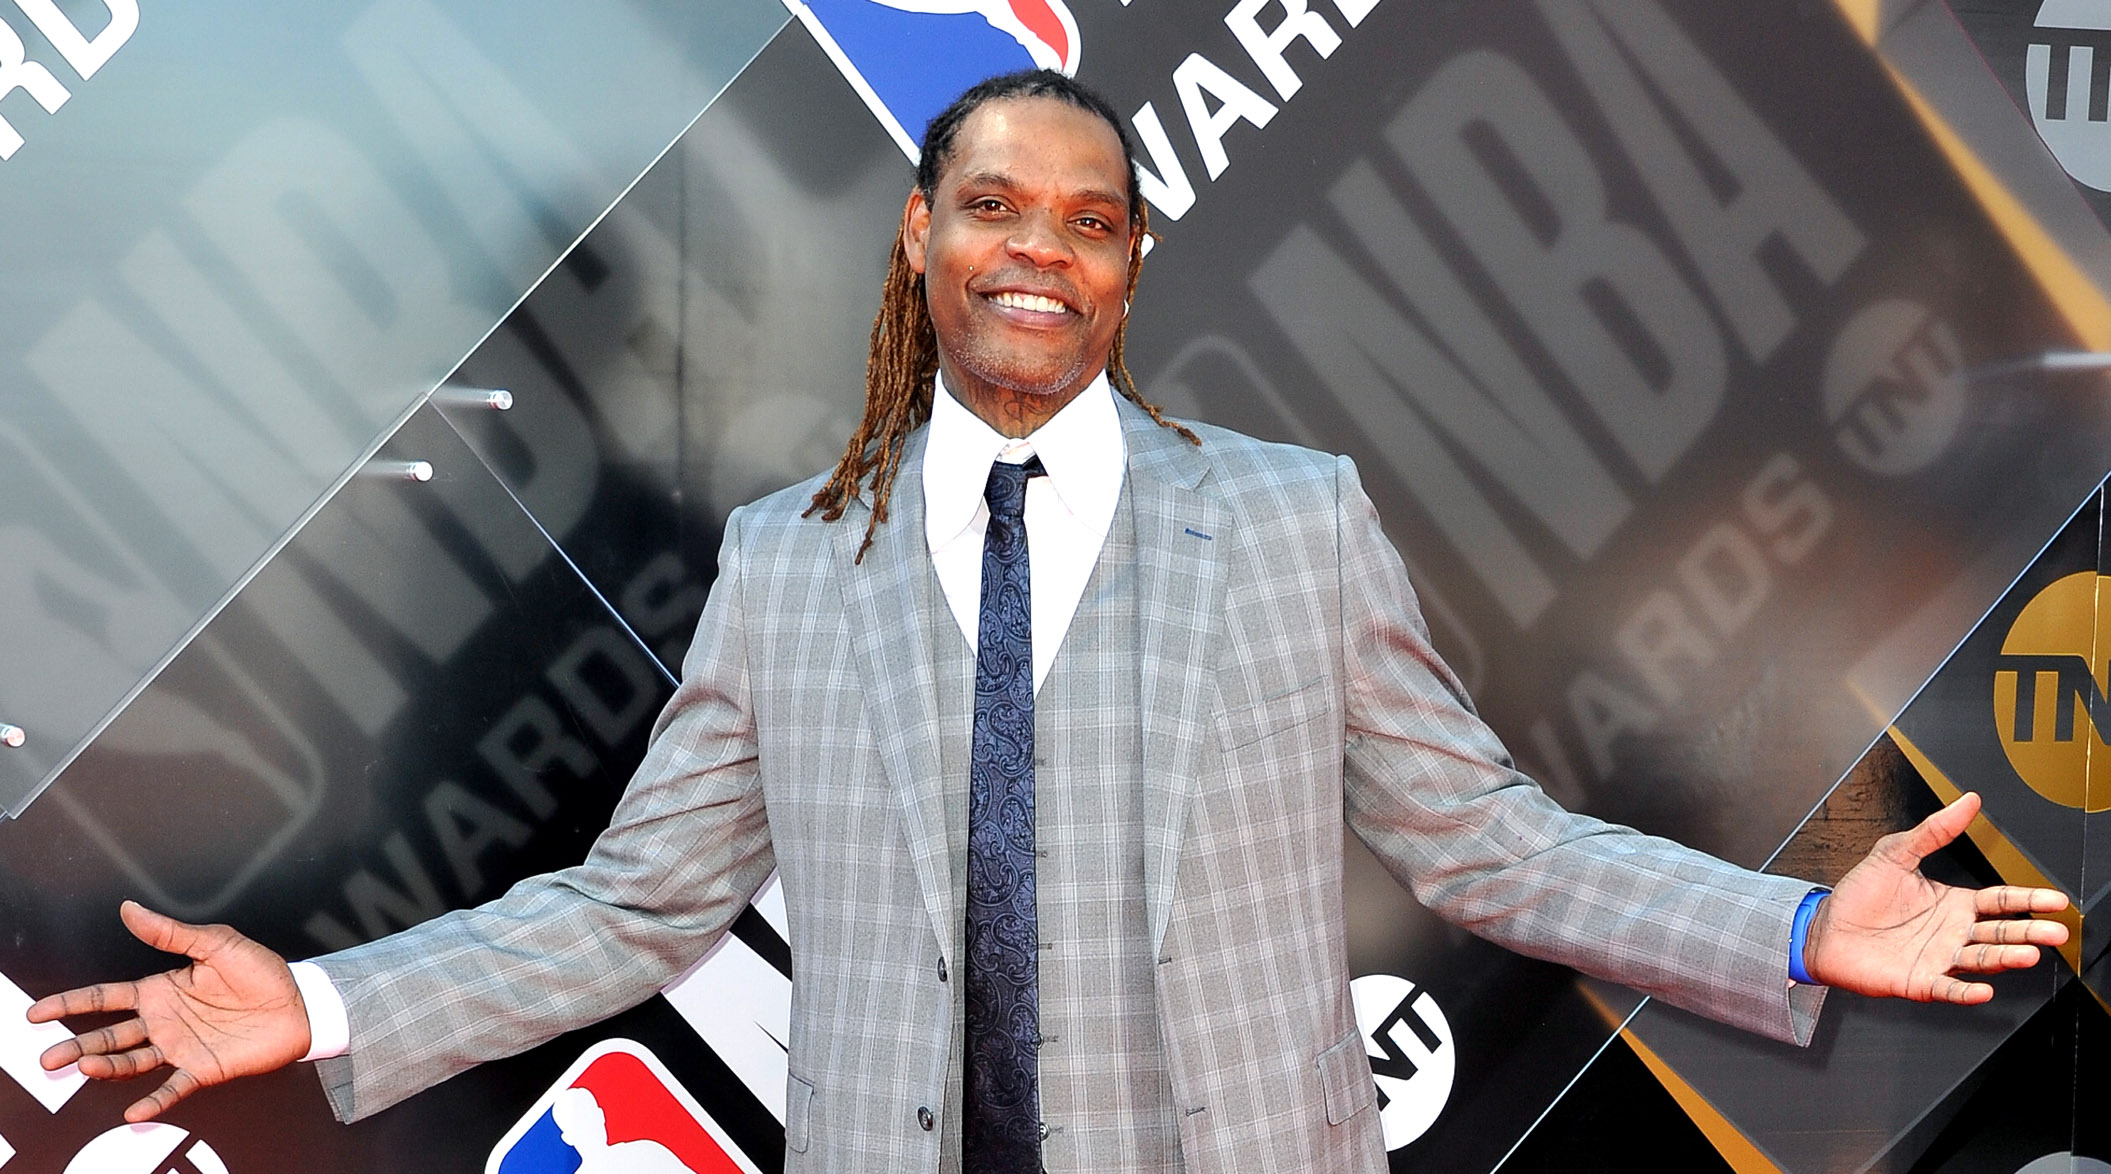 Latrell Sprewell, Who Made Almost $100M, Starts GoFundMe To Raise $35K